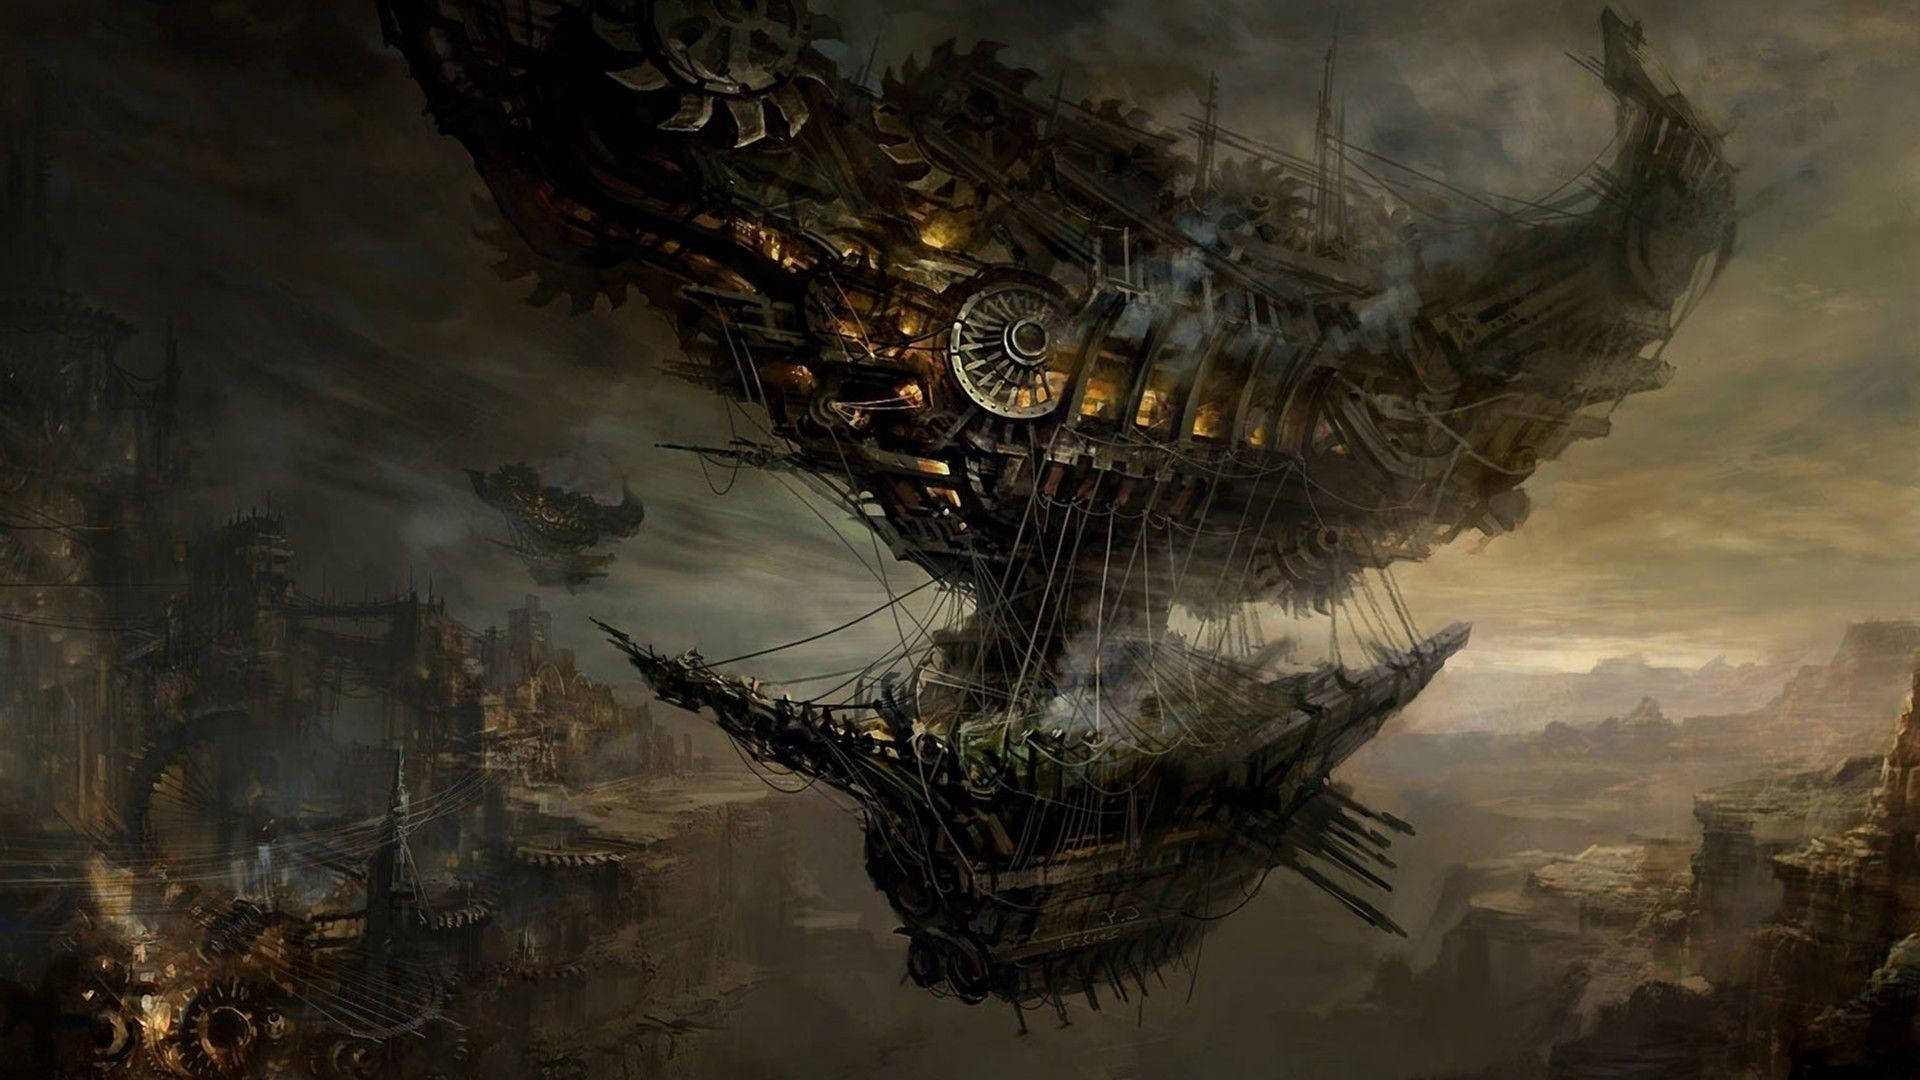 Exploring the Skies of the Steampunk World Wallpaper